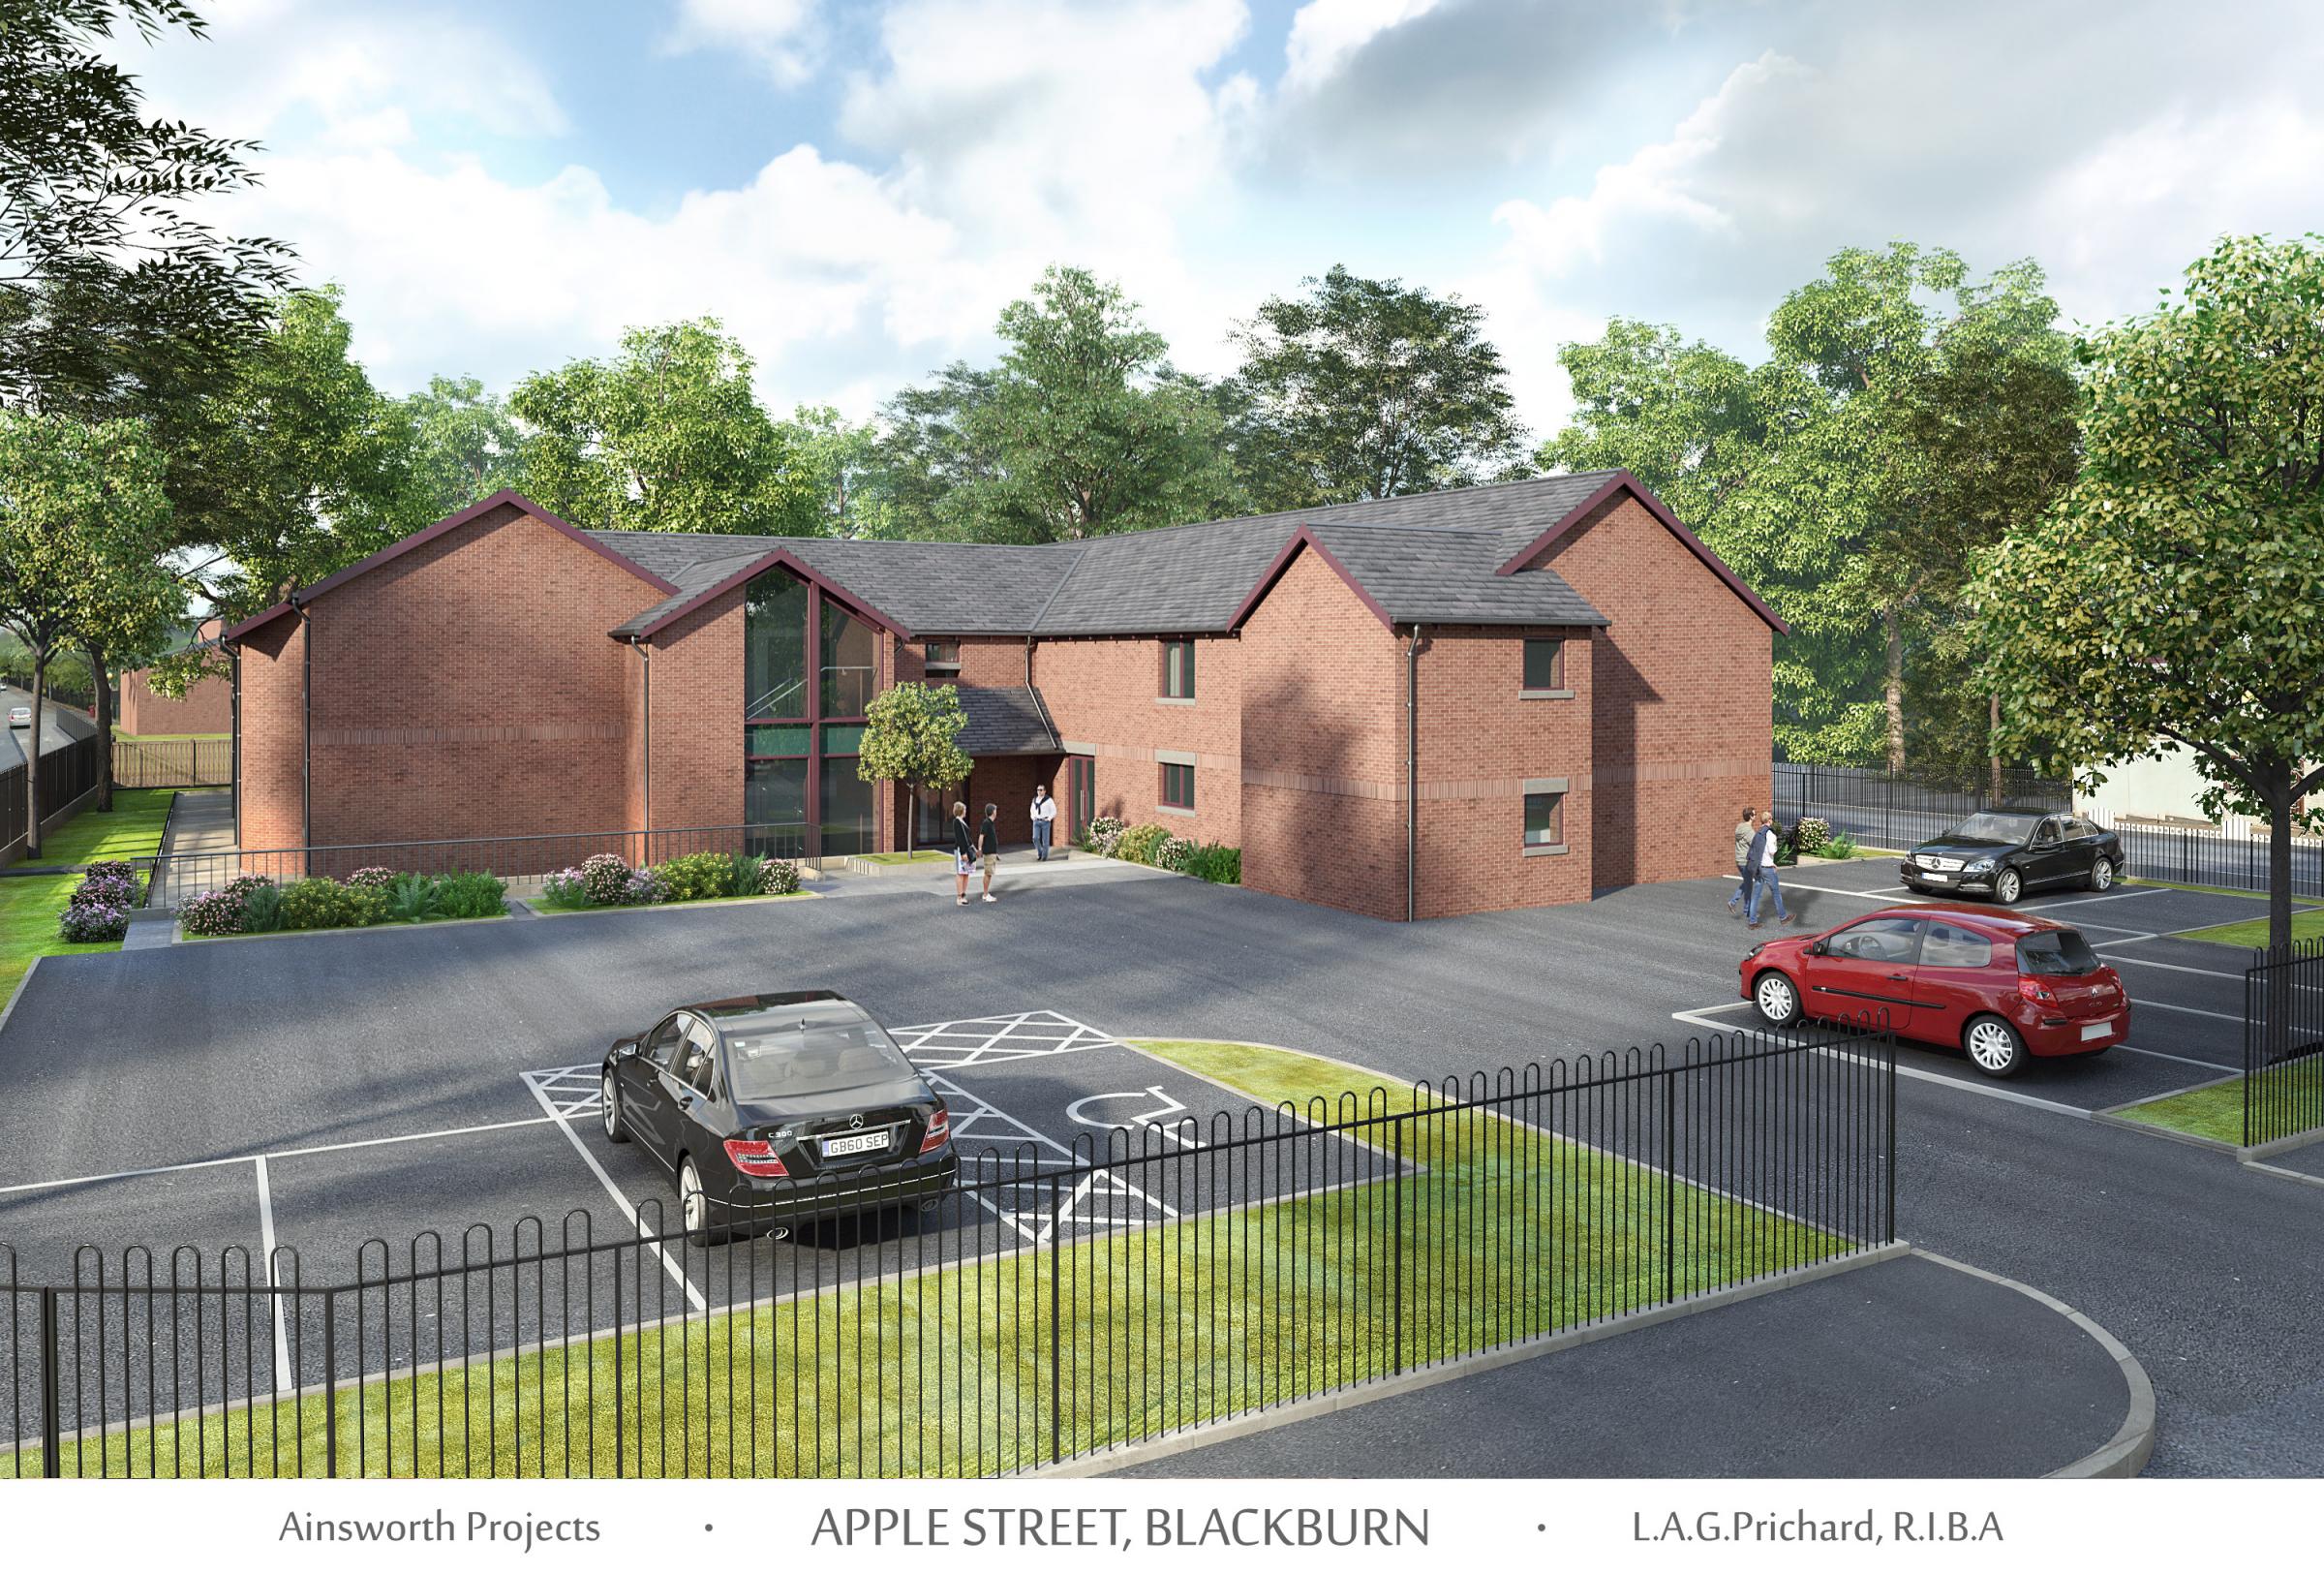 New supported flats for youngsters underway in Blackburn